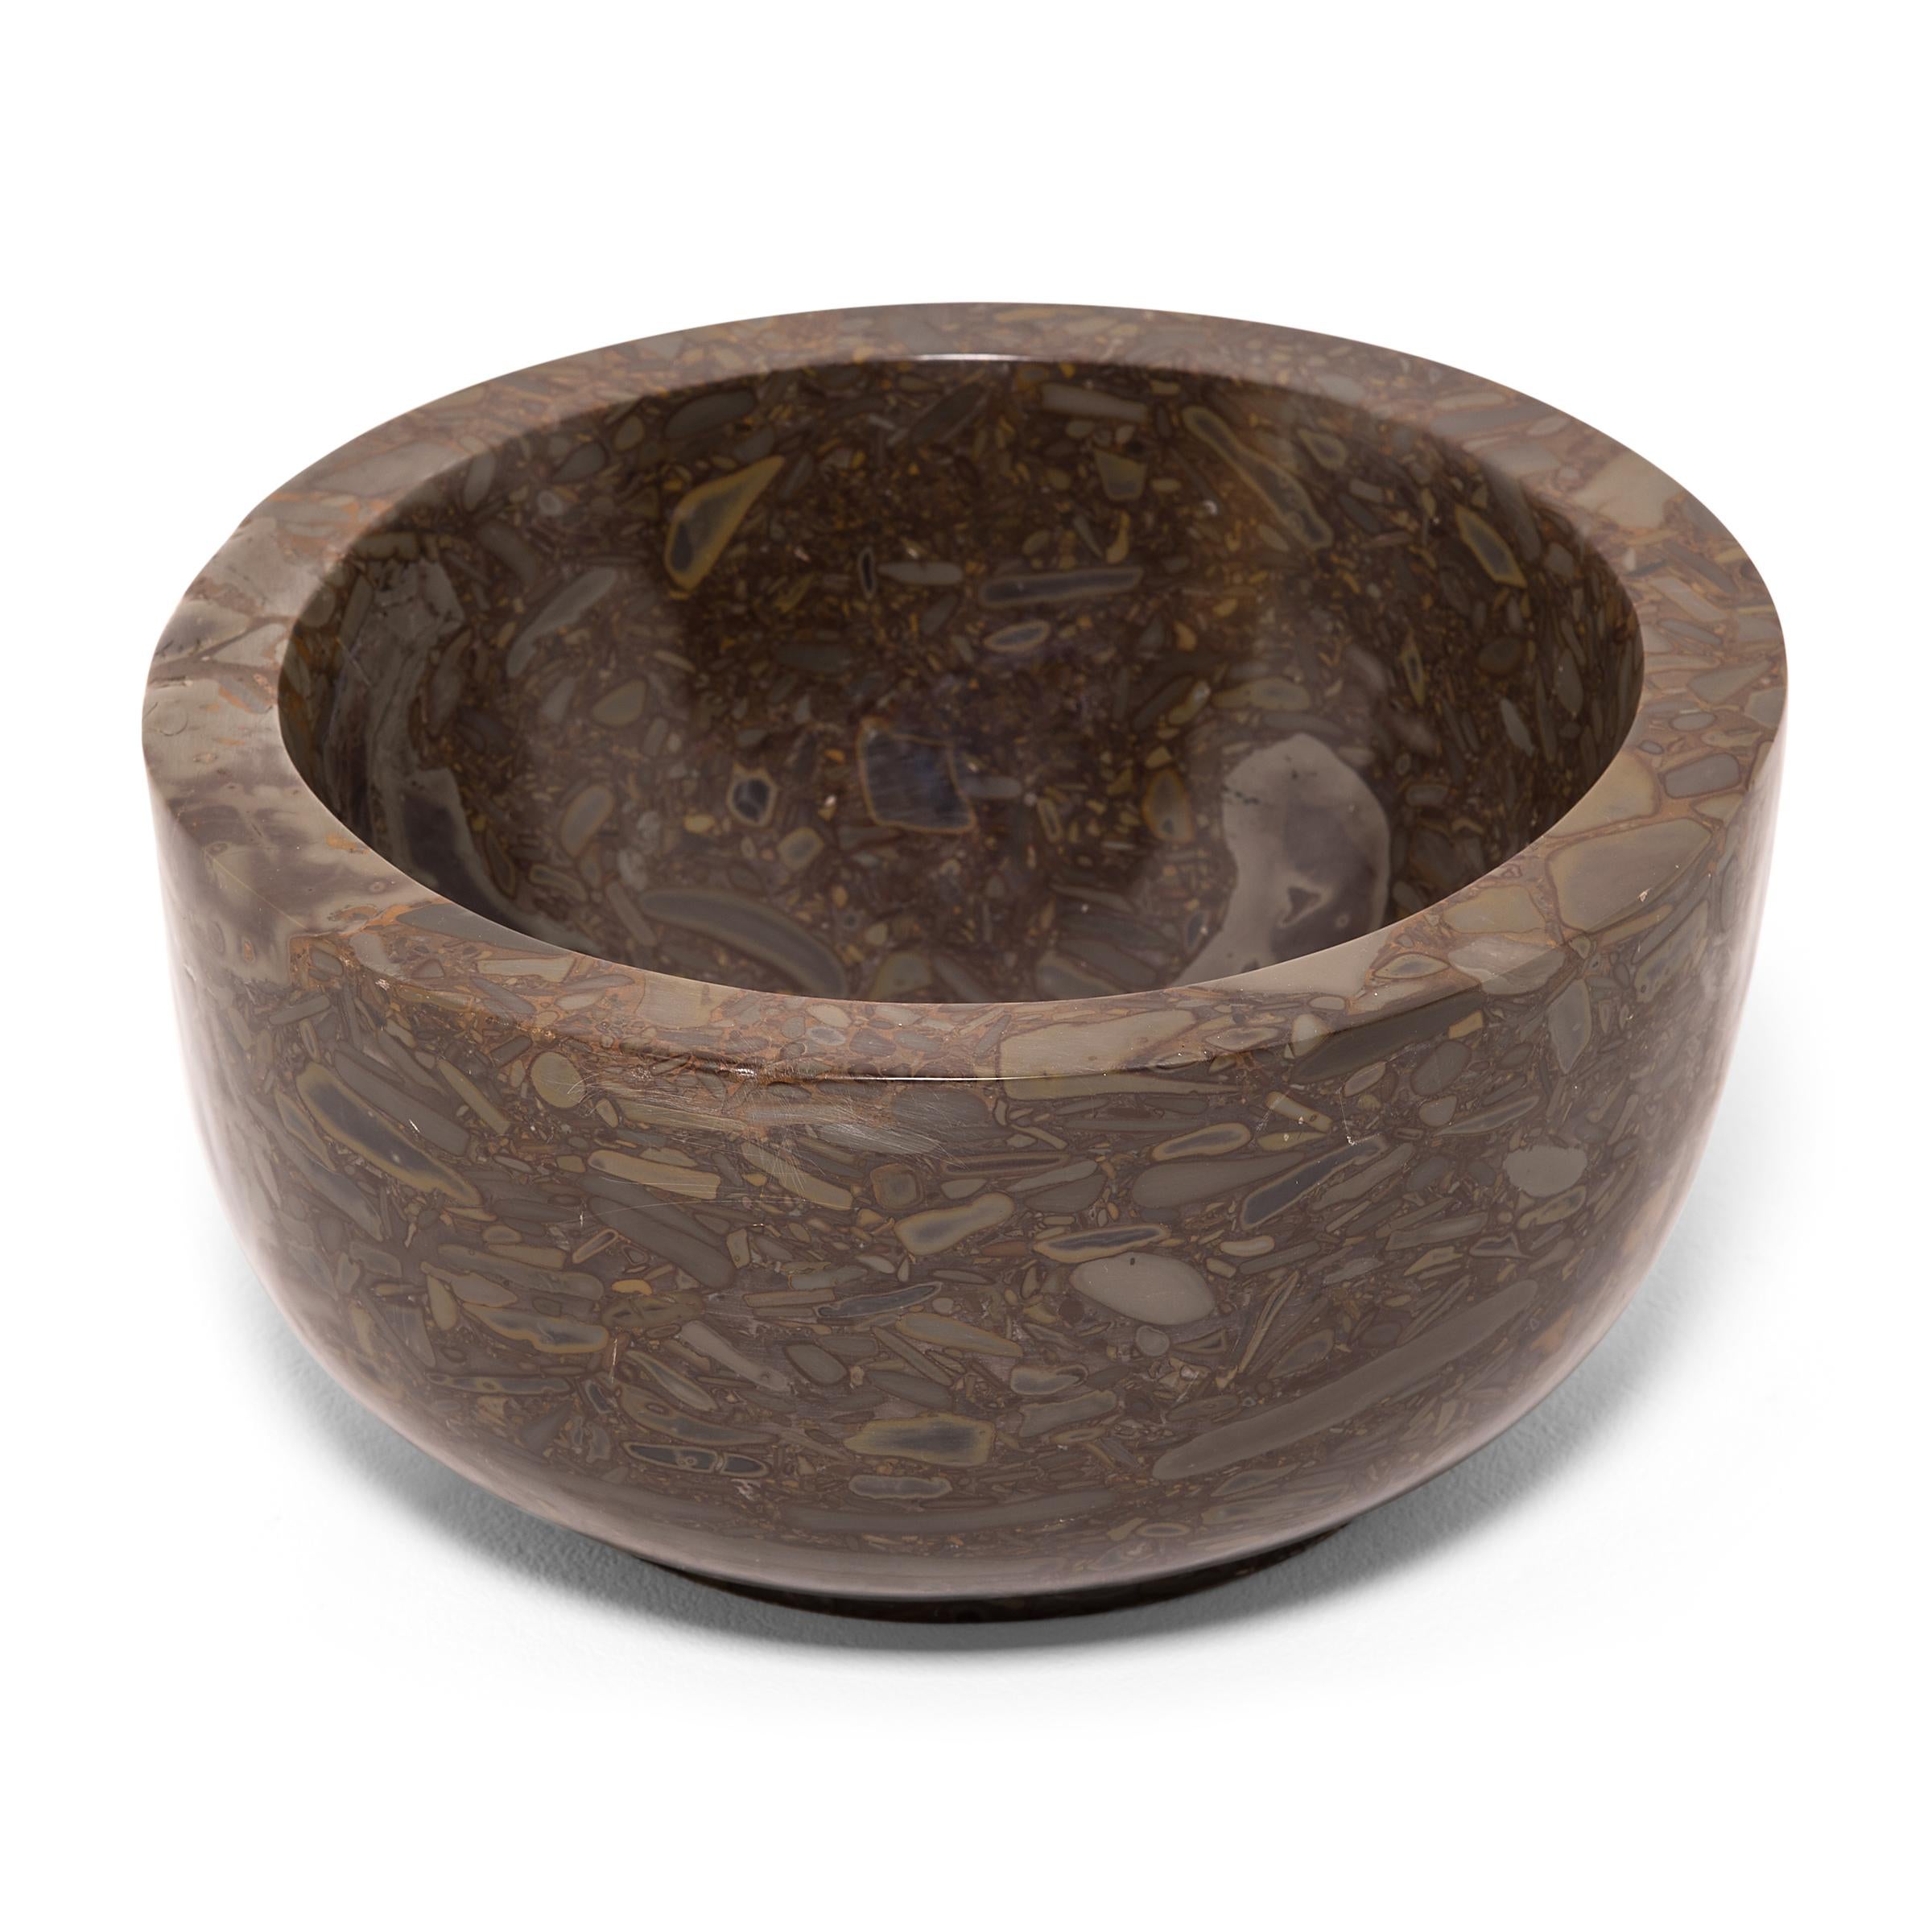 A clean-lined interpretation of an ancient form, this footed basin was hand-carved by artisans in China's Shandong province. It looks as if it were meticulously painted but the mesmerizing pattern of the puddingstone is actually inherent to the